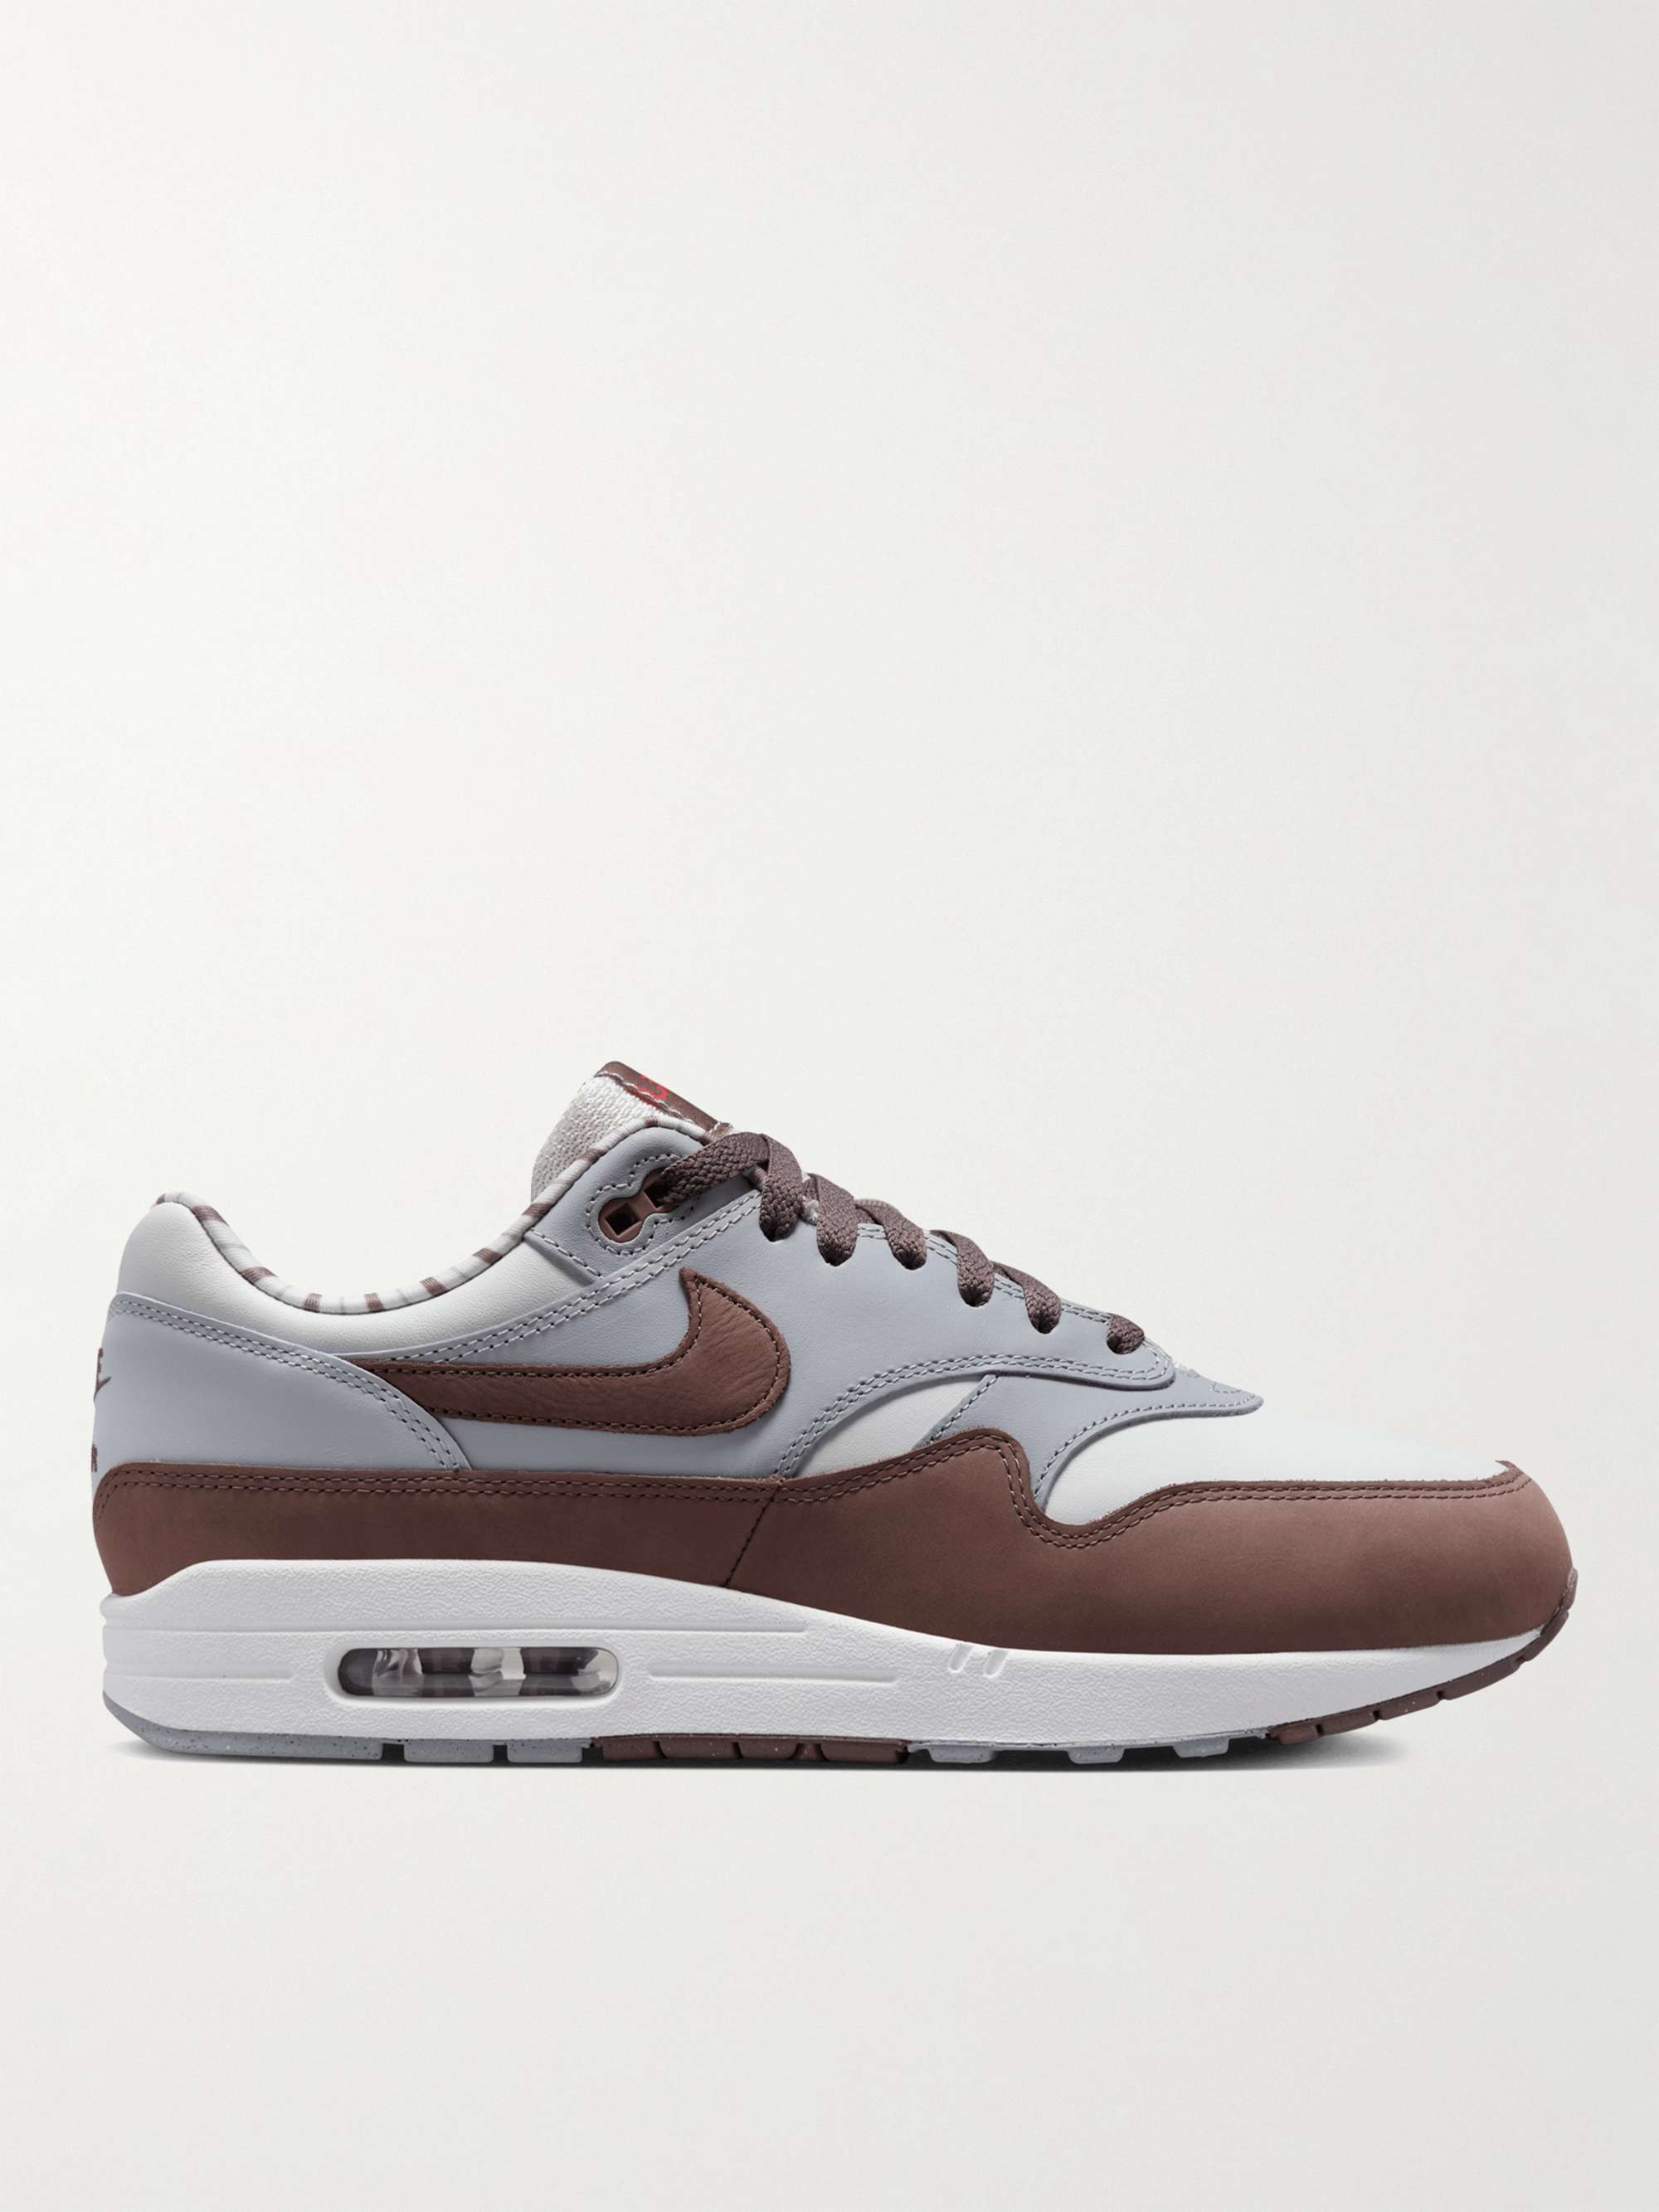 NIKE Air Max 1 Leather Sneakers for Men | MR PORTER